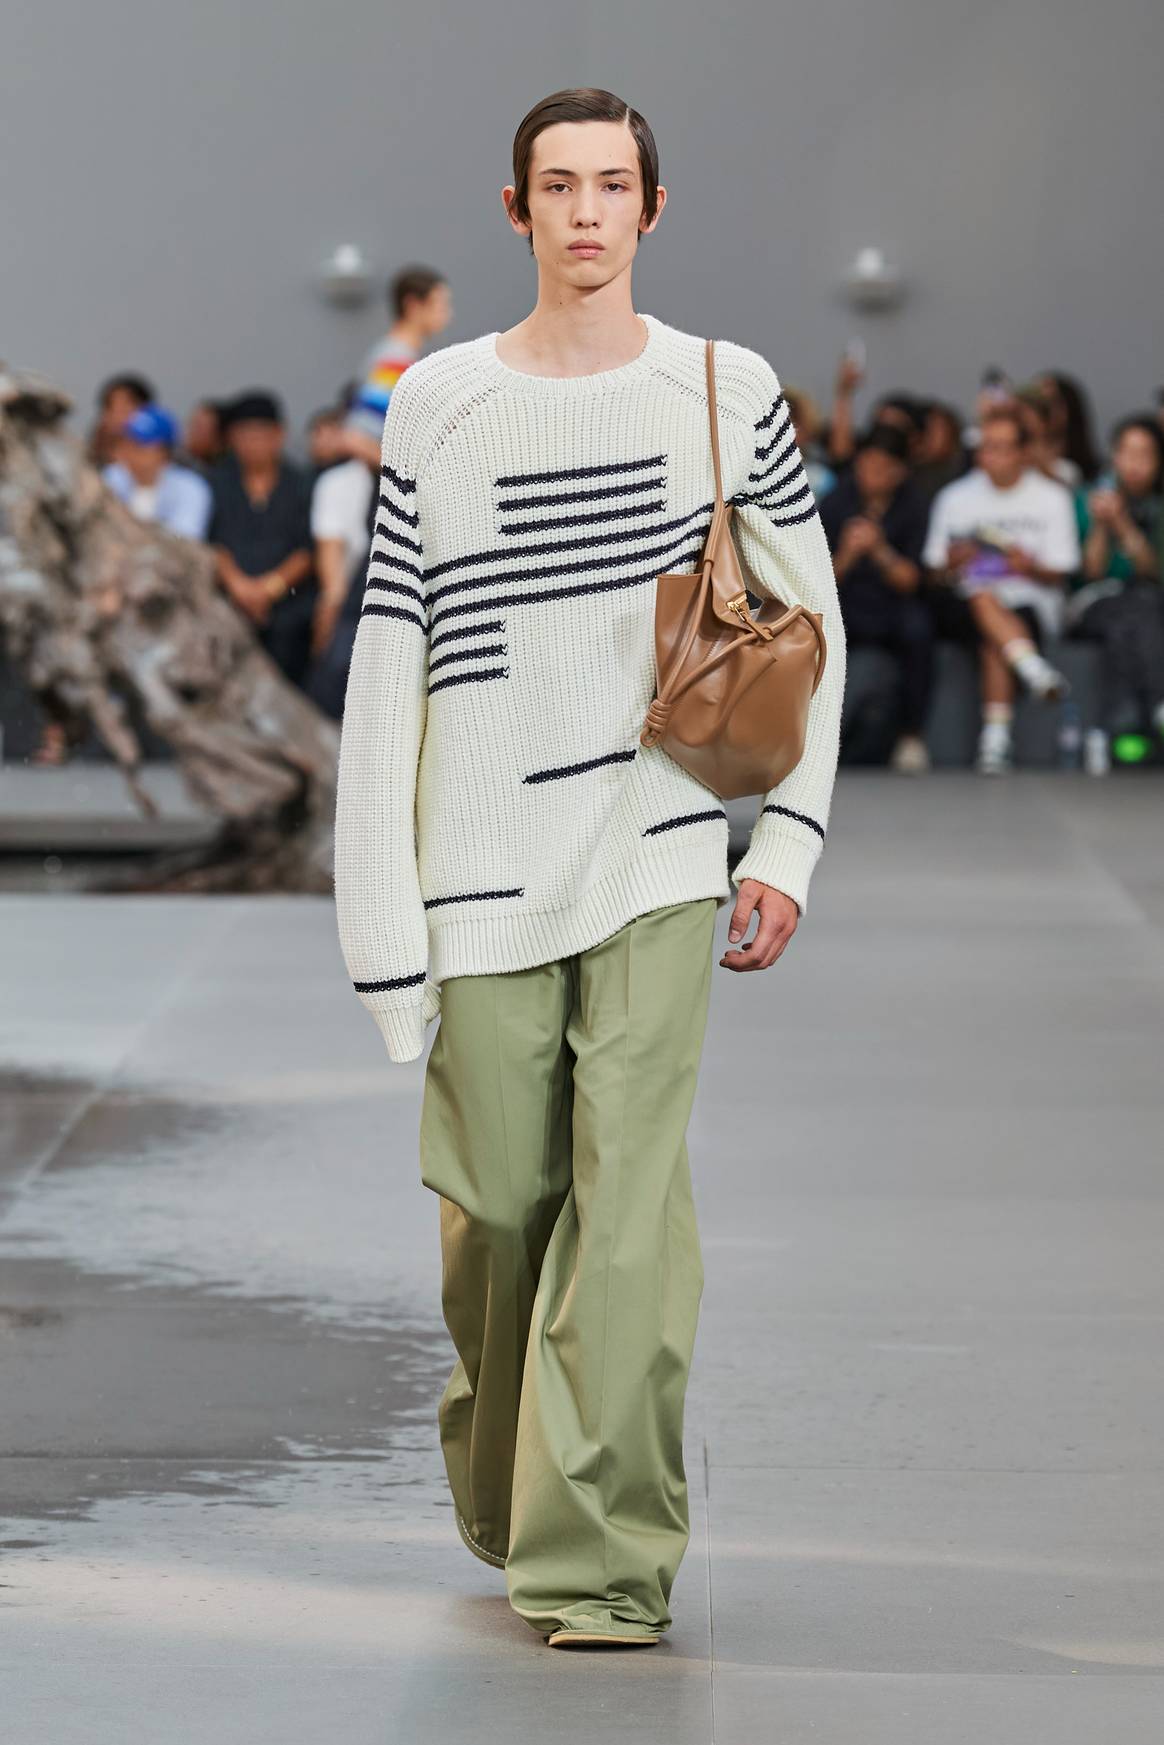 Top 10 runway models of the ss24 menswear shows: diversity was the key ...